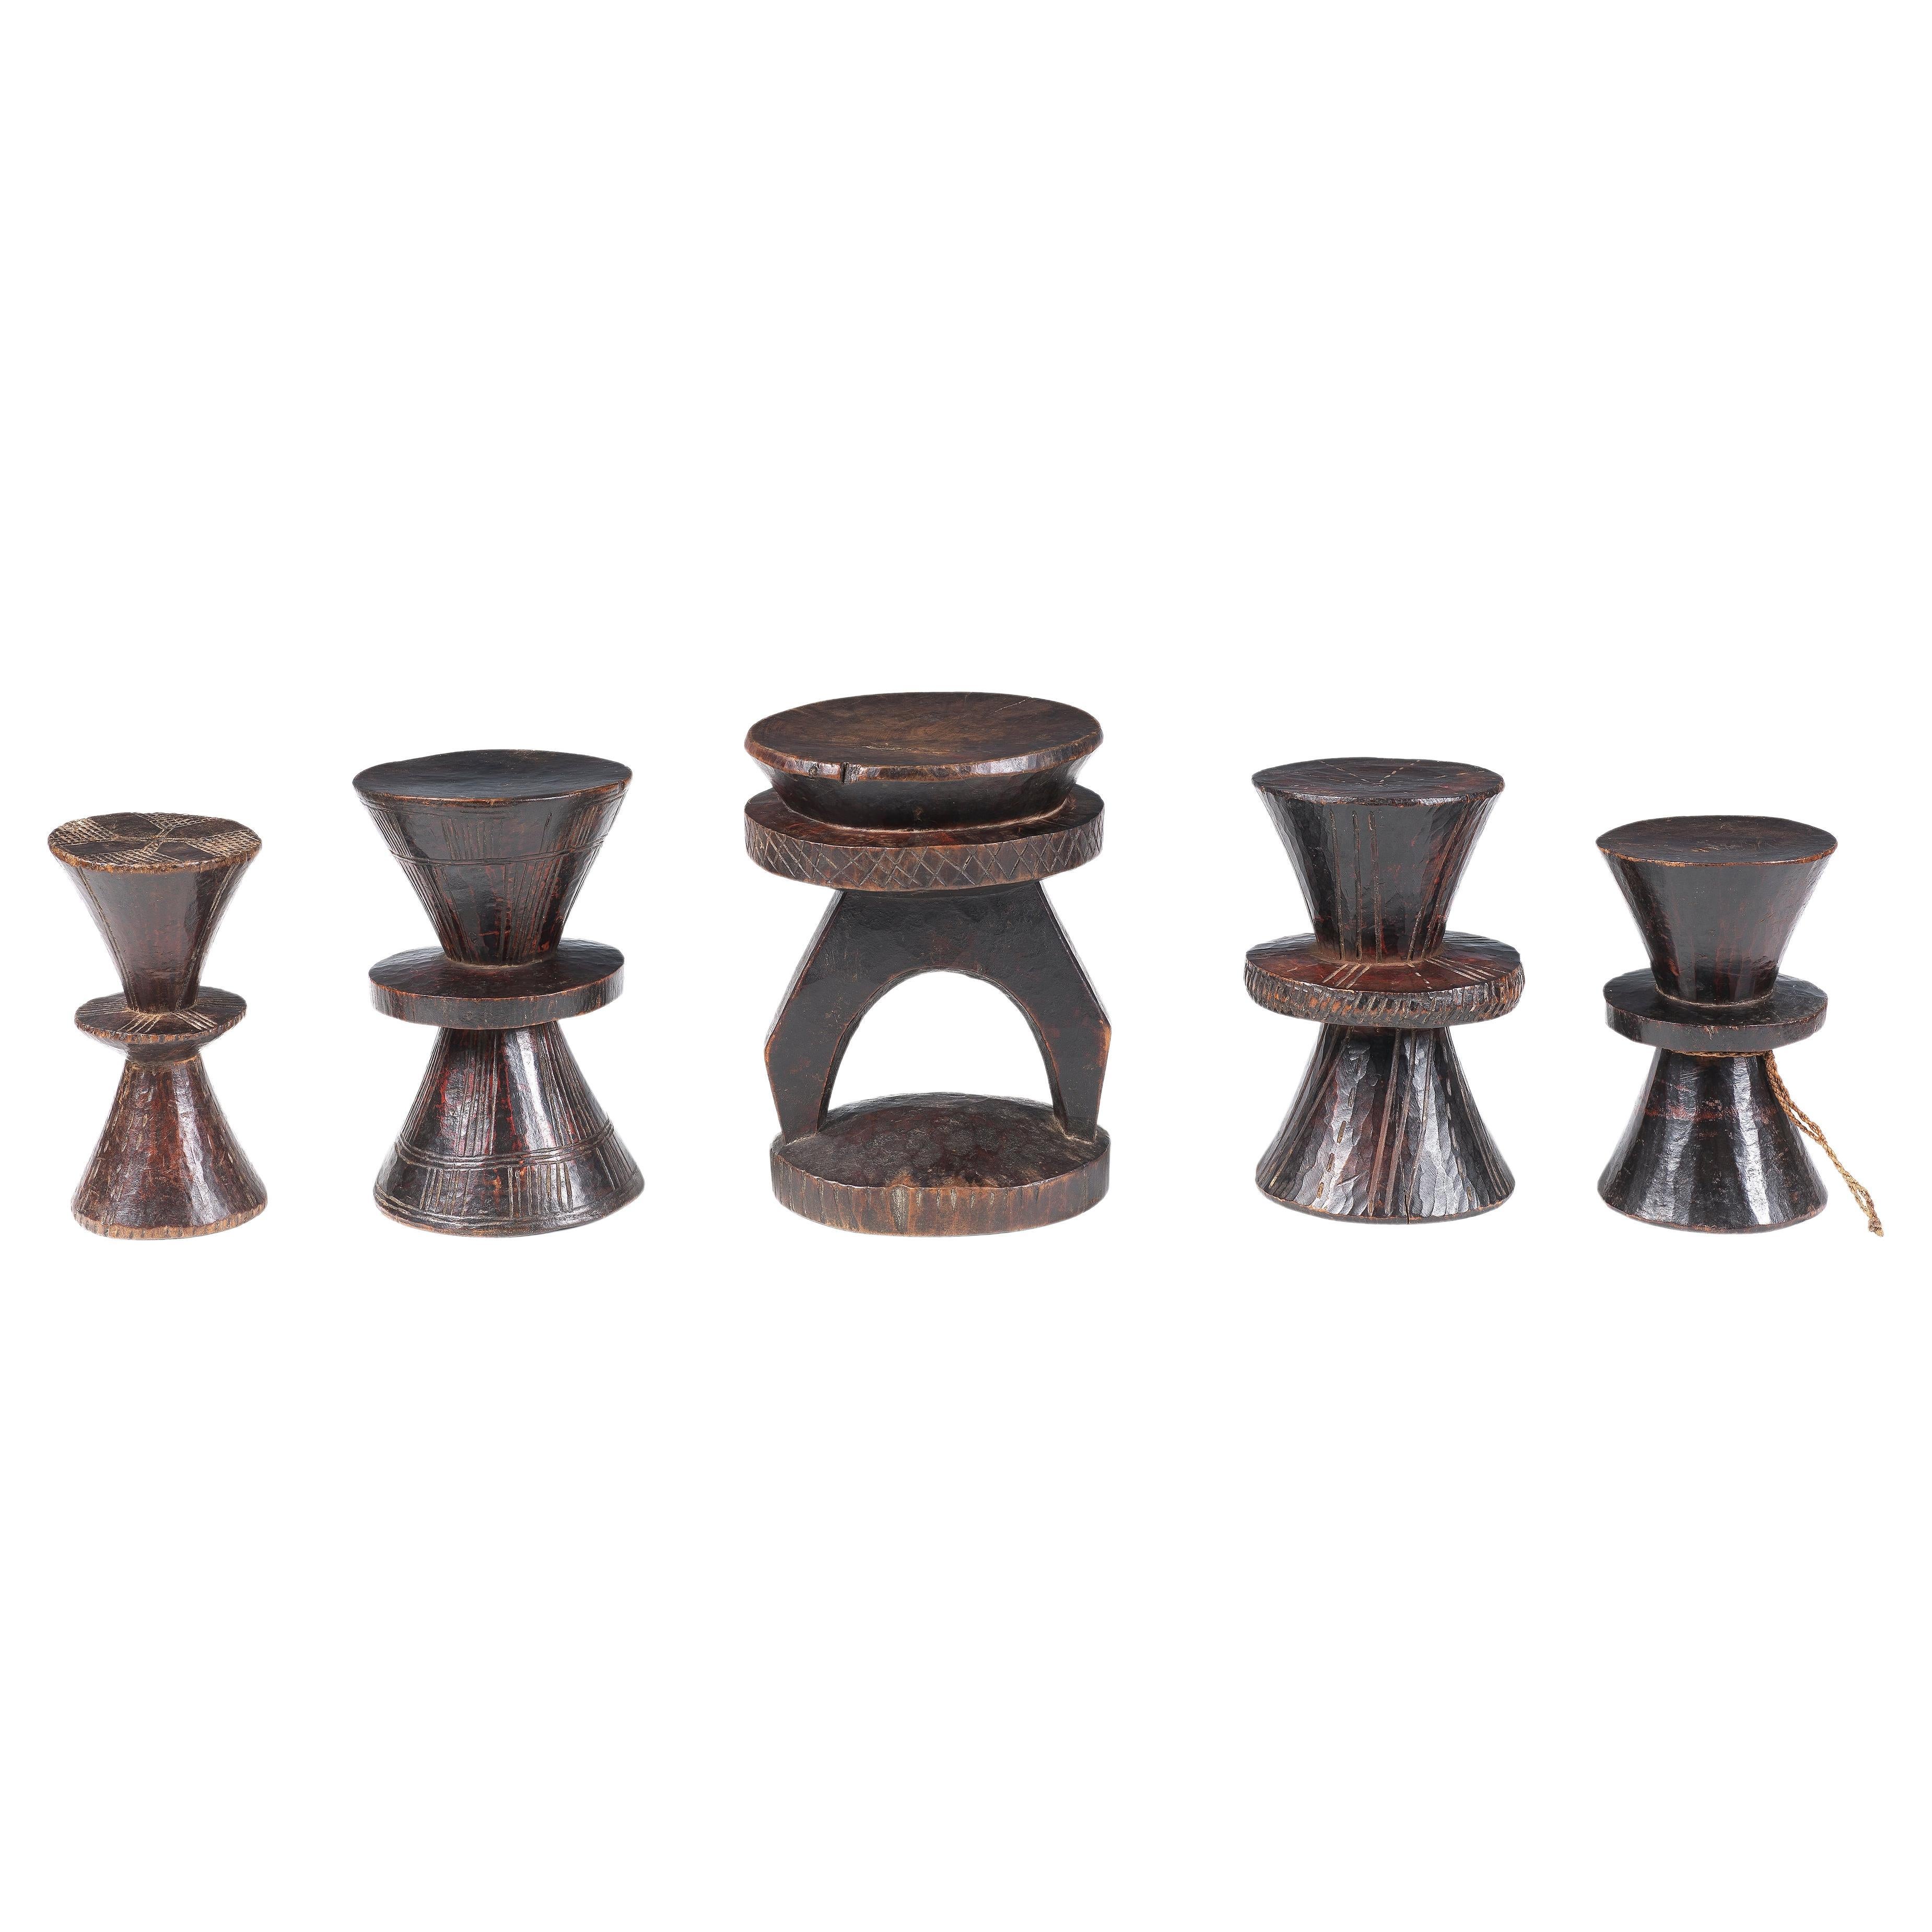 Antique Tribal Ethiopian Ceremonial Coffee Stands For Sale